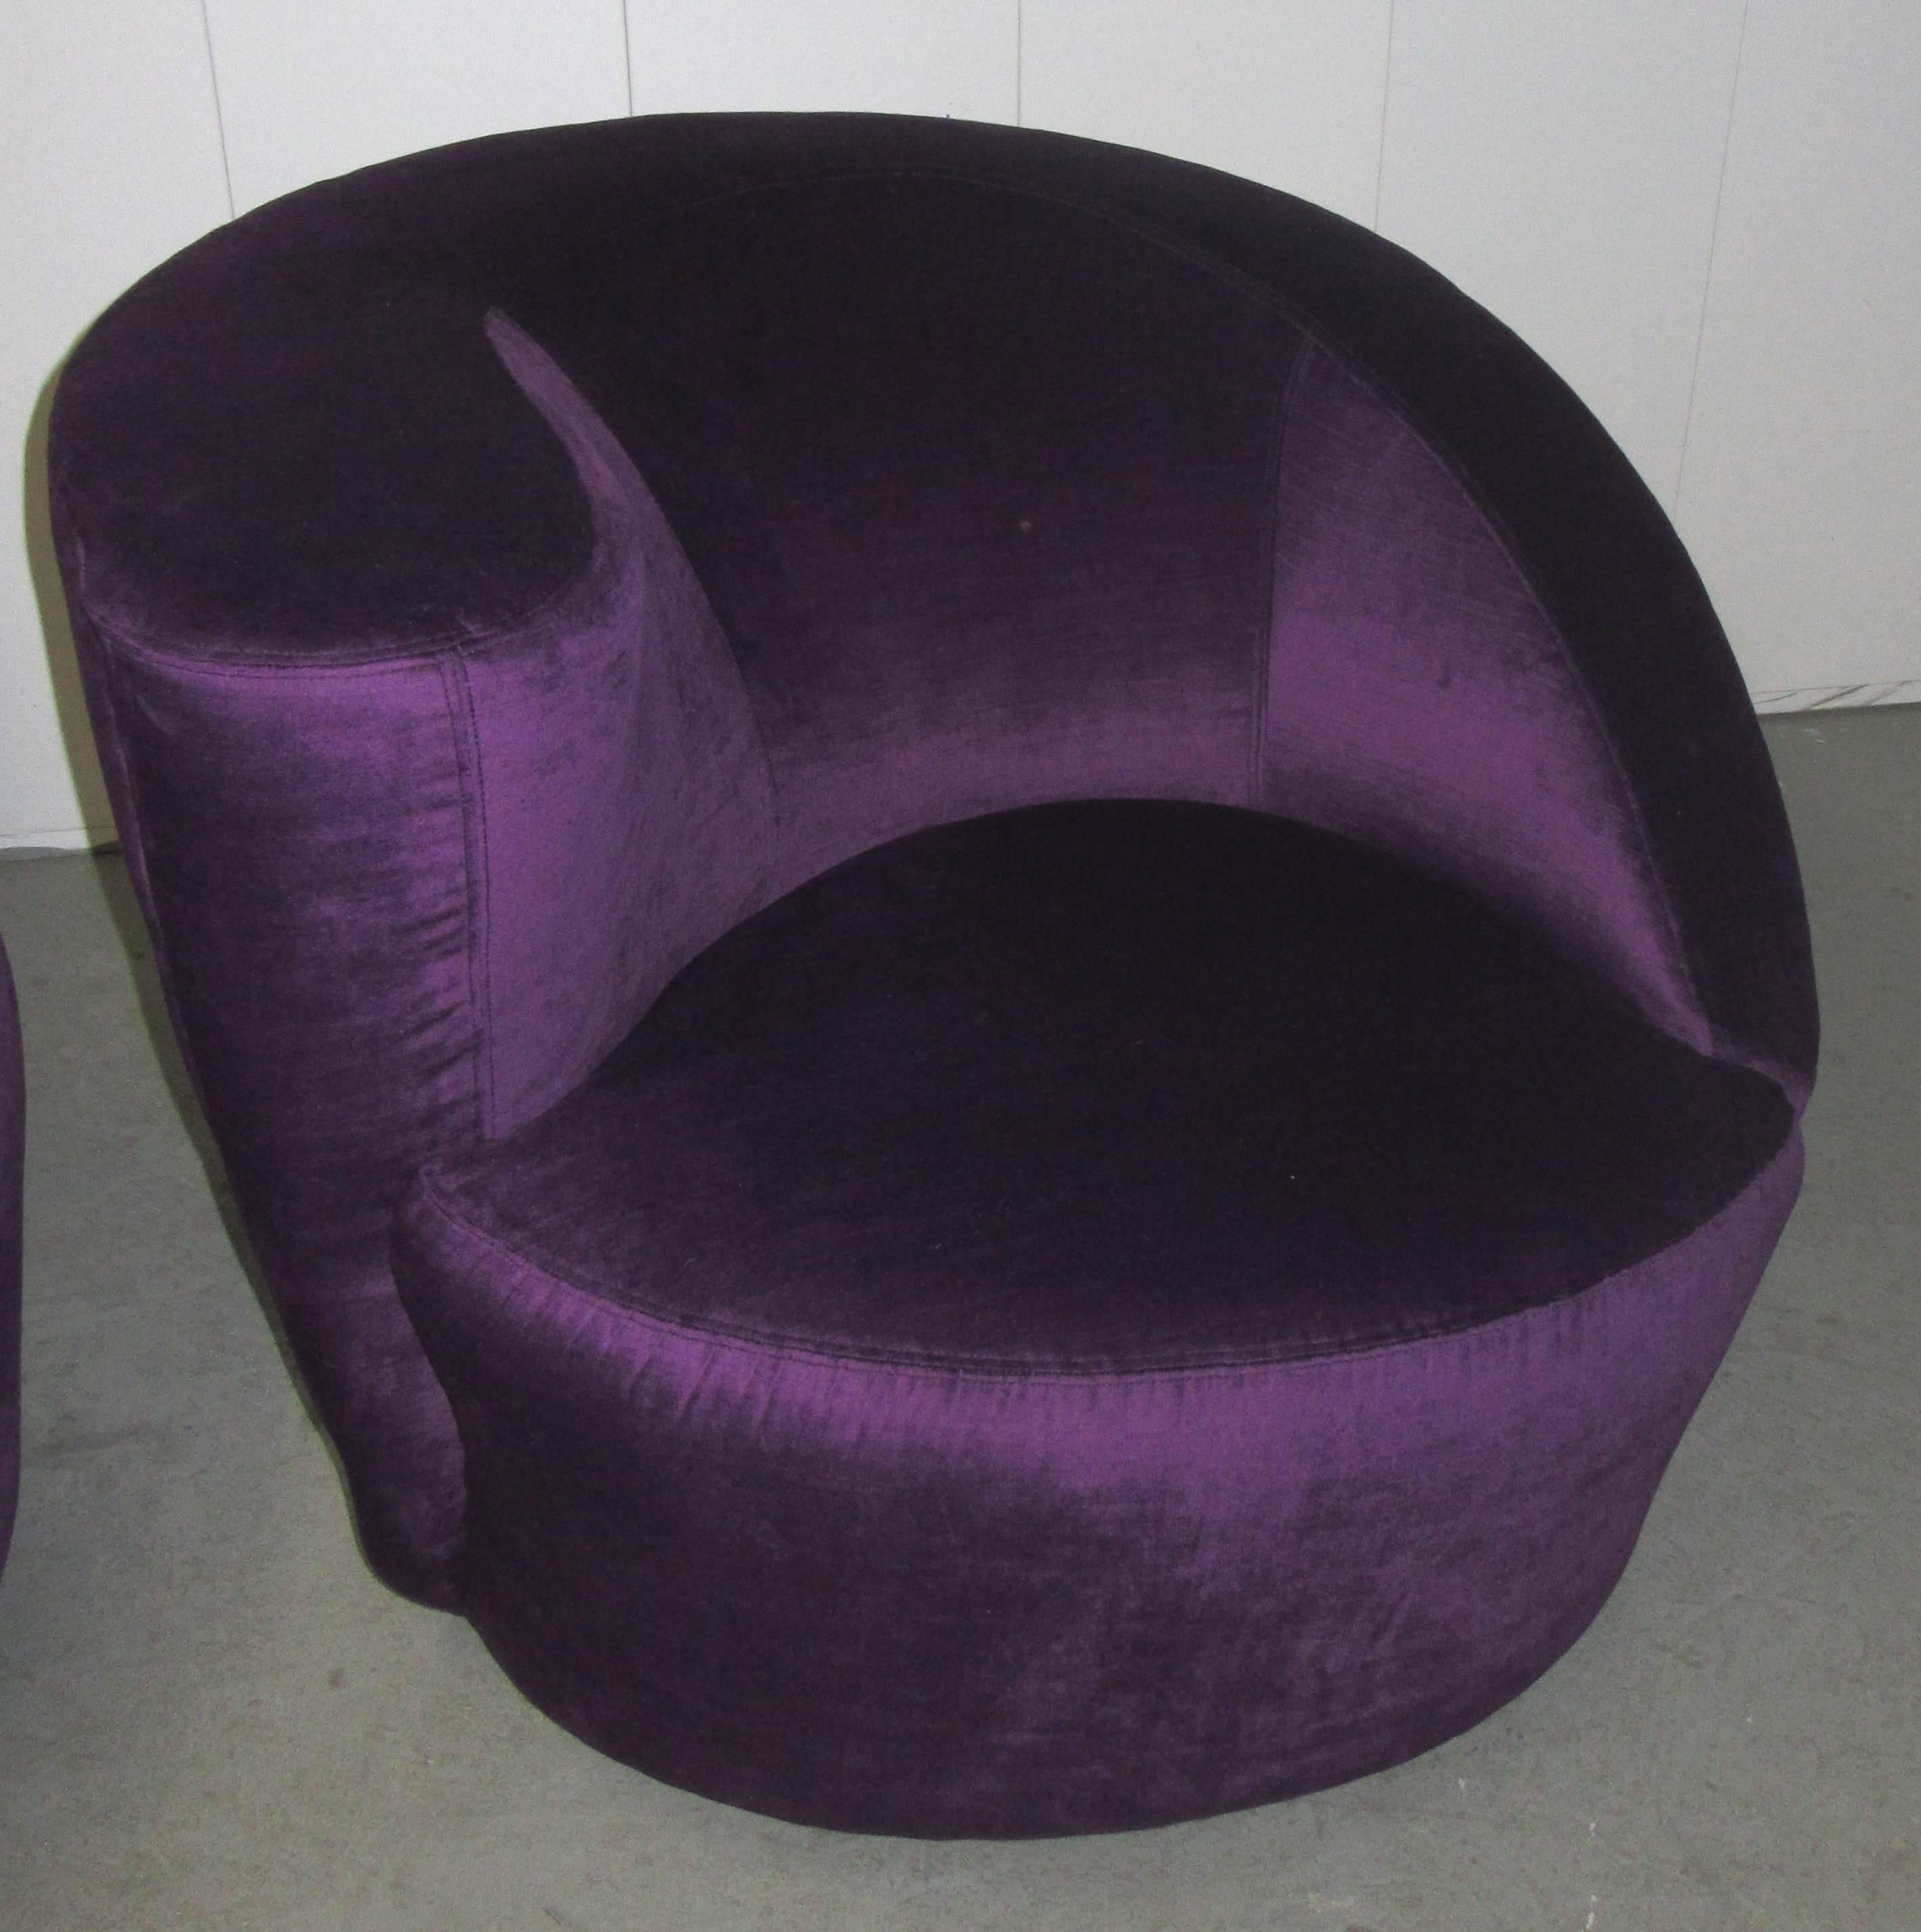 Newly upholstered in a luxurious velvet, the nautilus chair represents Kagan's innovative use of sculpture and asymmetry in contemporary furniture design. The comfortable padded chair sits on a round platform base and uses a memory swivel.